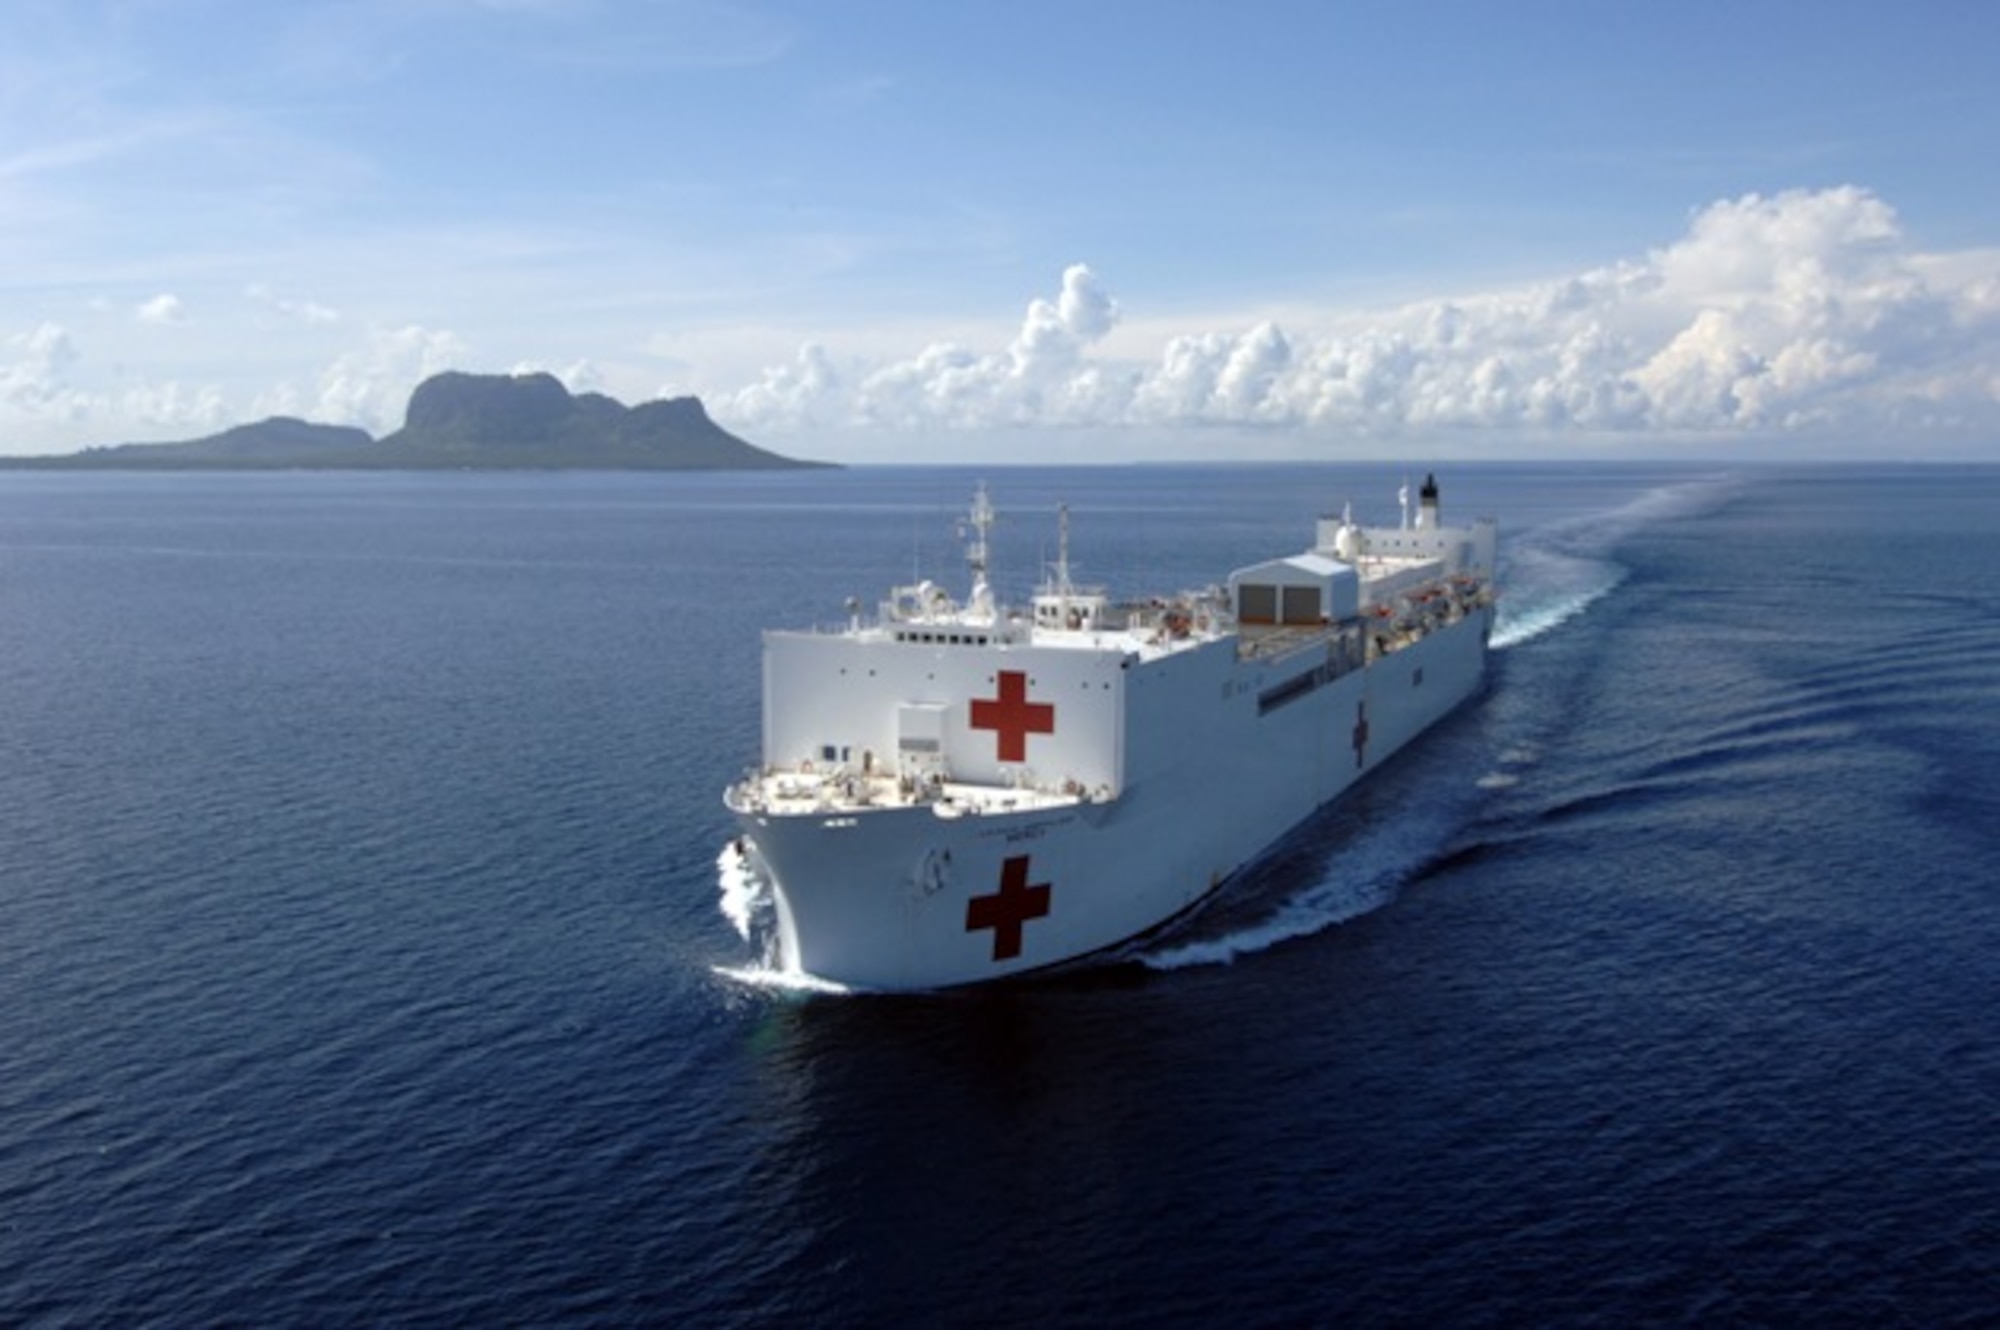 The U.S. Naval Ship Mercy (T-AH 19) sets sail for its next port visit after a four-week
stay in the Philippines. Mercy is a hospital ship able to rapidly respond to a range
of situations on short notice and capable of supporting medical and humanitarian
assistance needs with special medical equipment and a multi-specialized medical
team, providing a range of services ashore as well as onboard. (U.S. Navy photo/PHC Edward Martens)